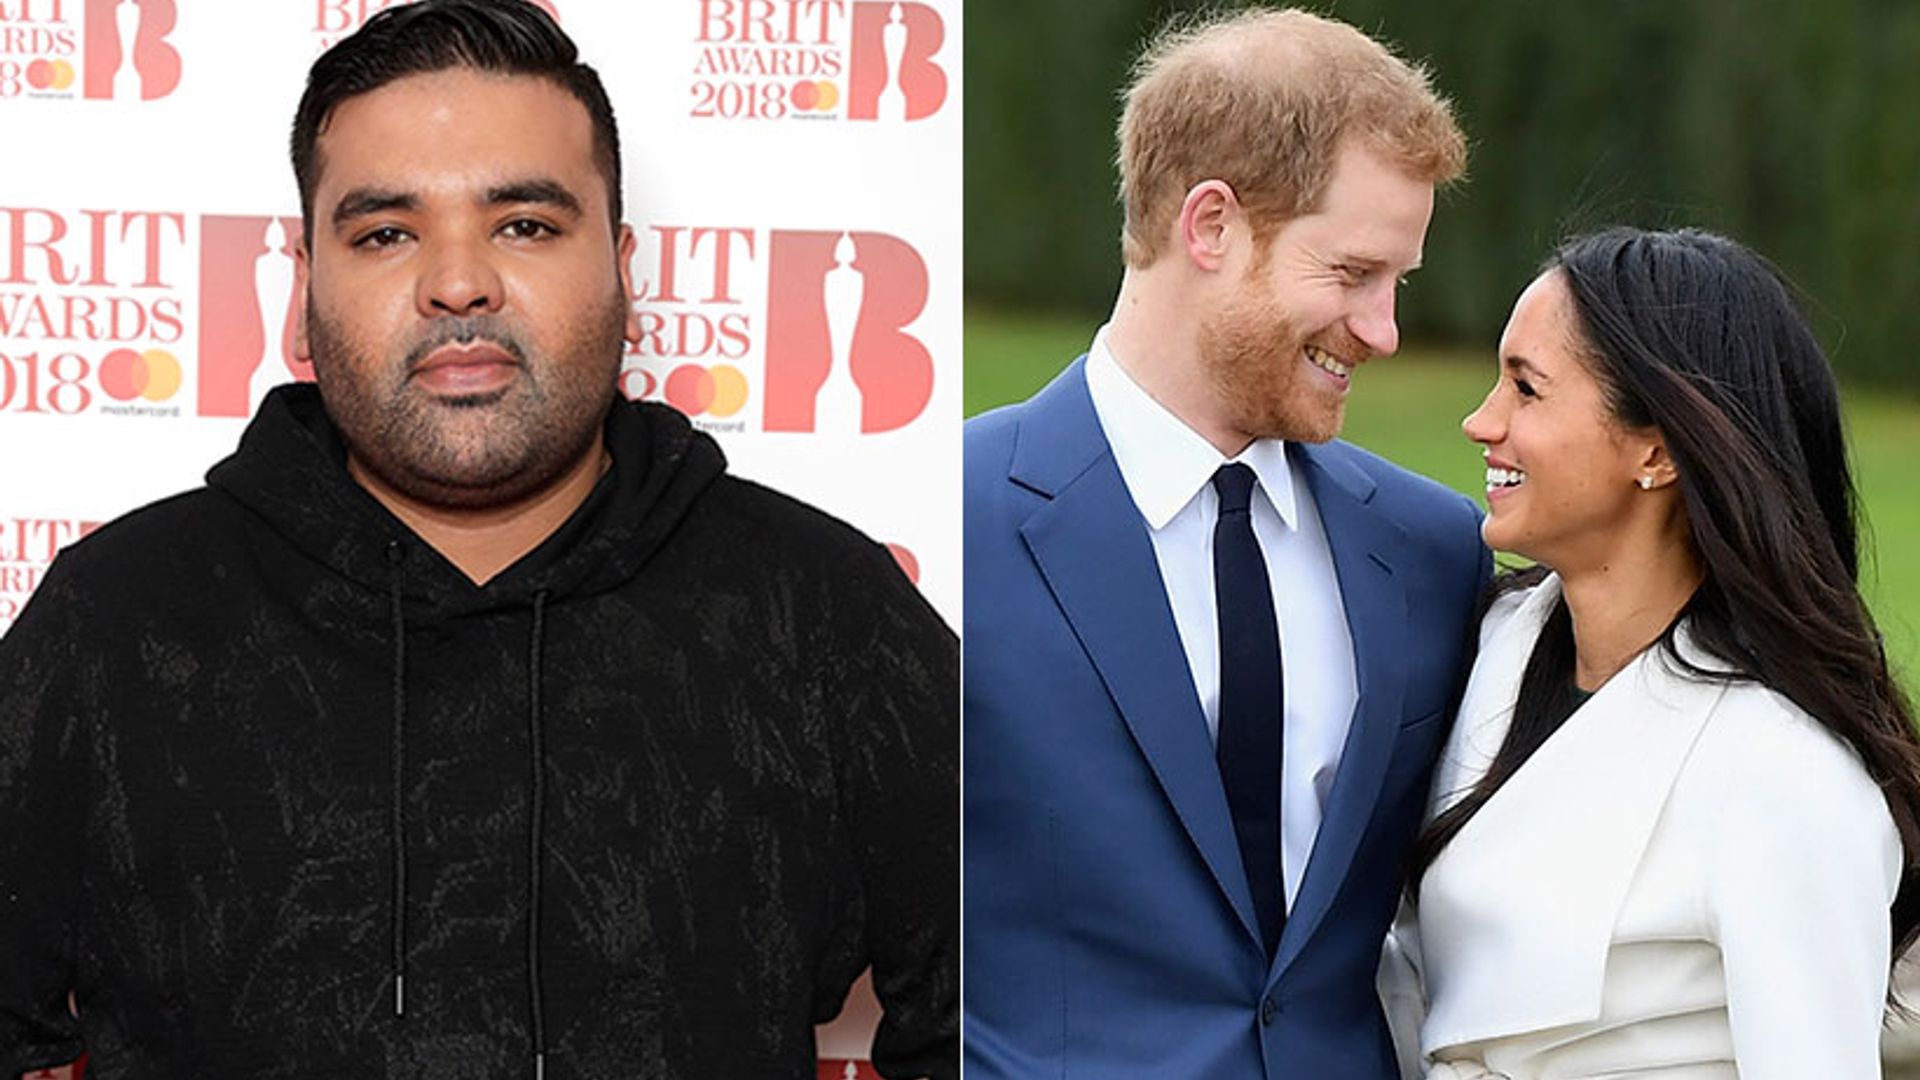 Prince Harry and Meghan Markle's wedding: Is Naughty Boy set to perform with Beyoncé?